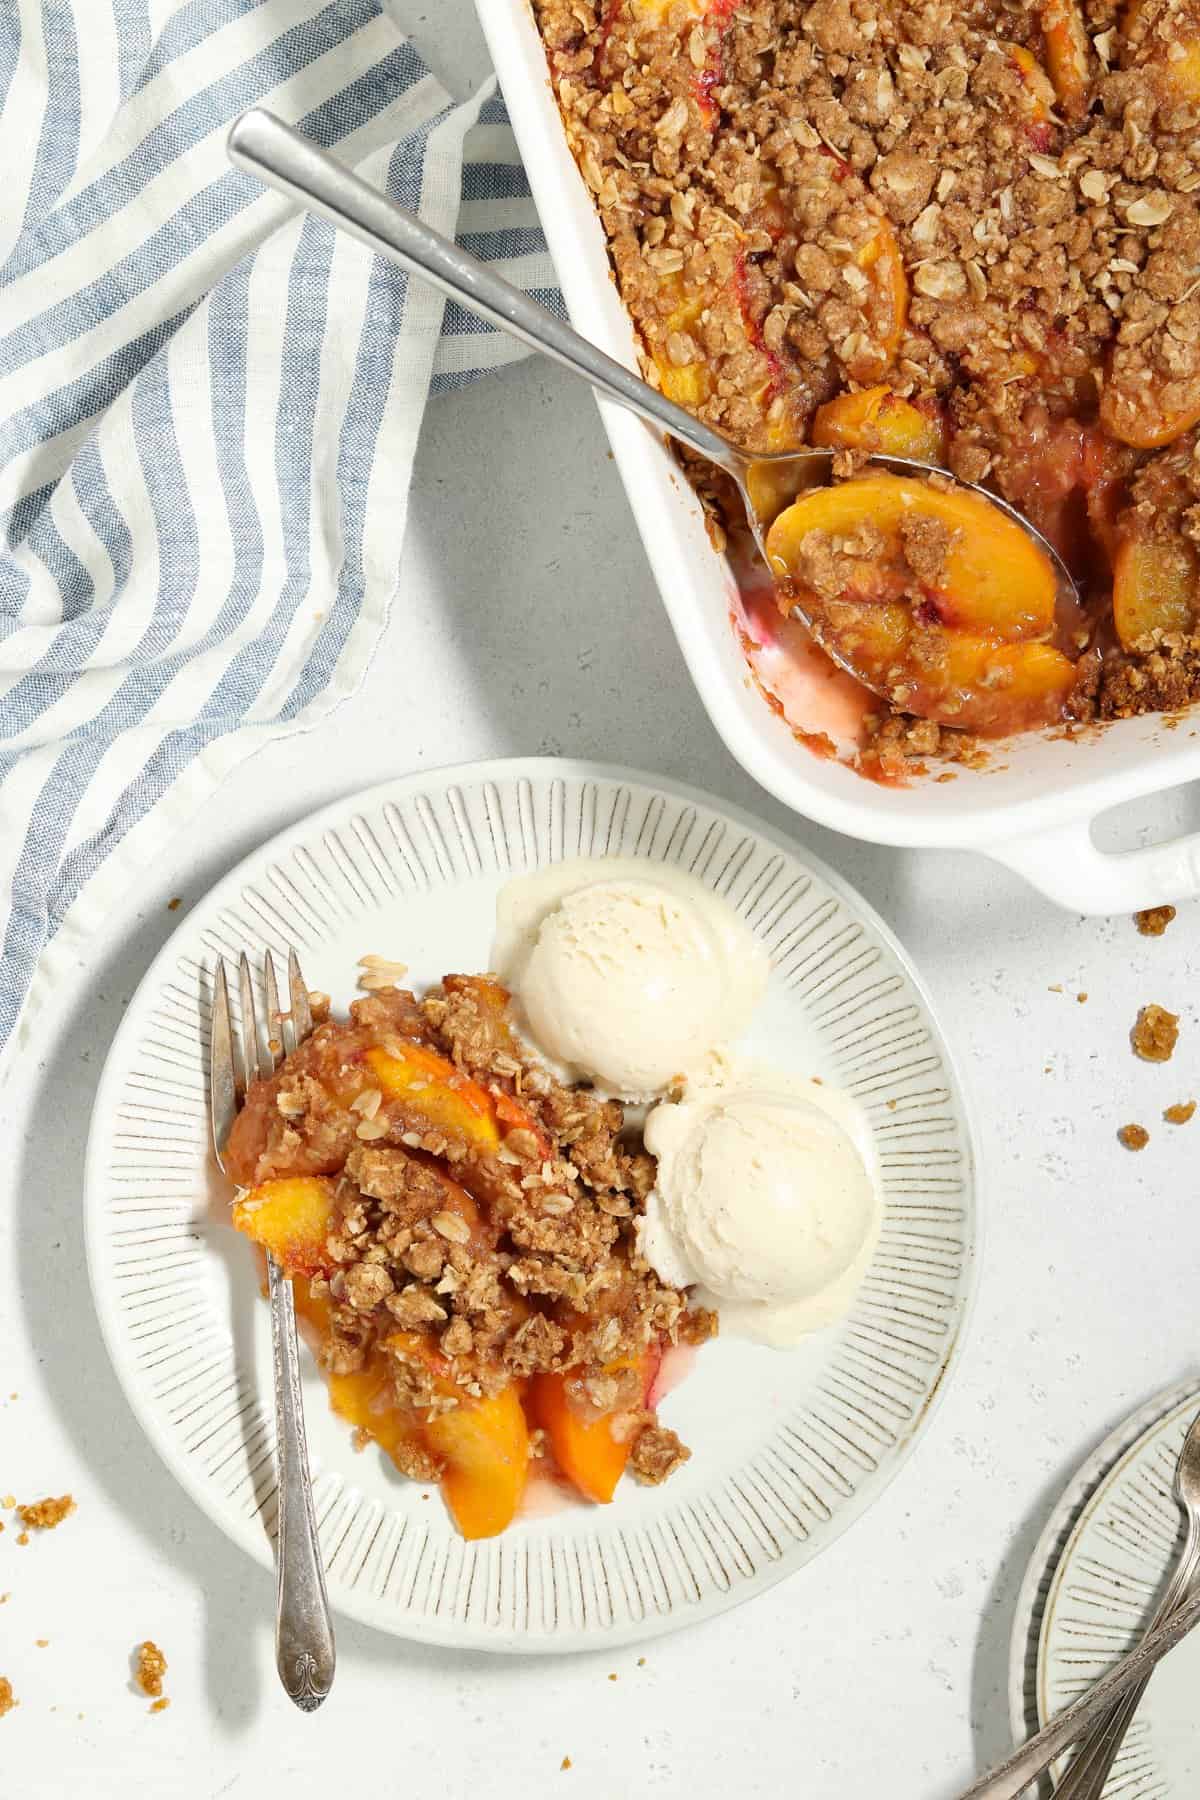 Overhead view of peach crisp and ice cream on a plate. Casserole dish on the side.